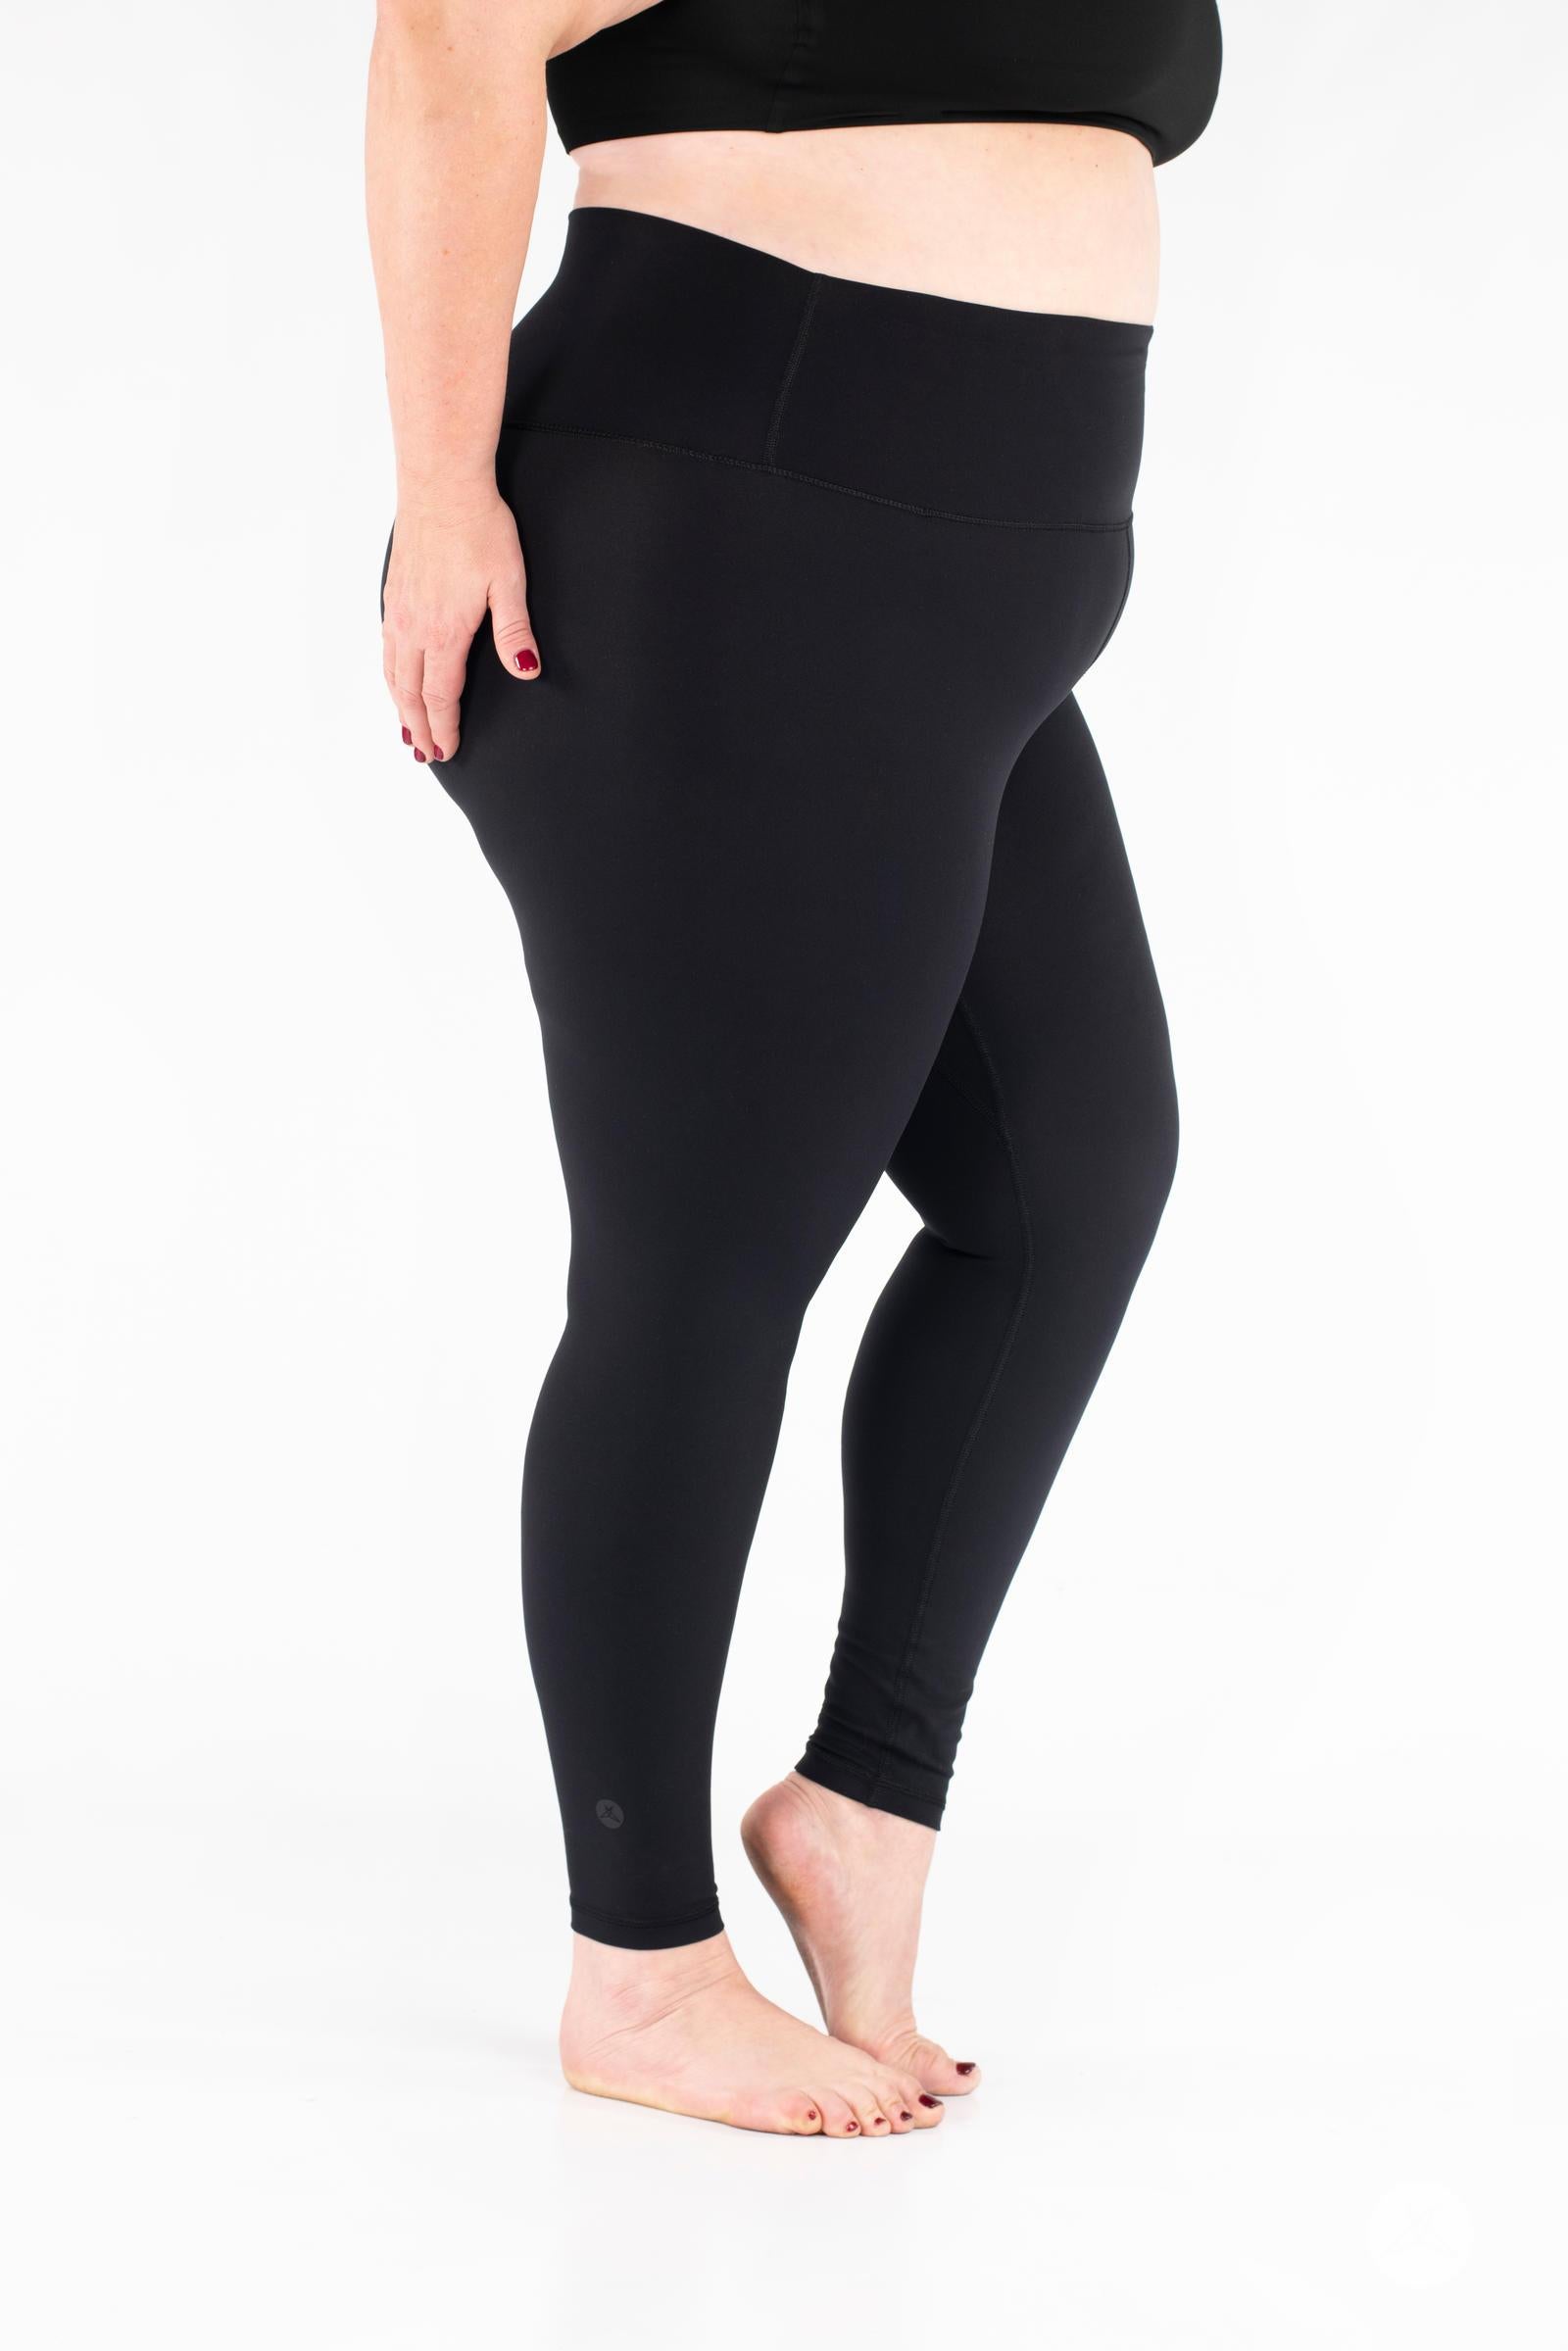 Soft Legging By Intimately At Free People, $38, Free People